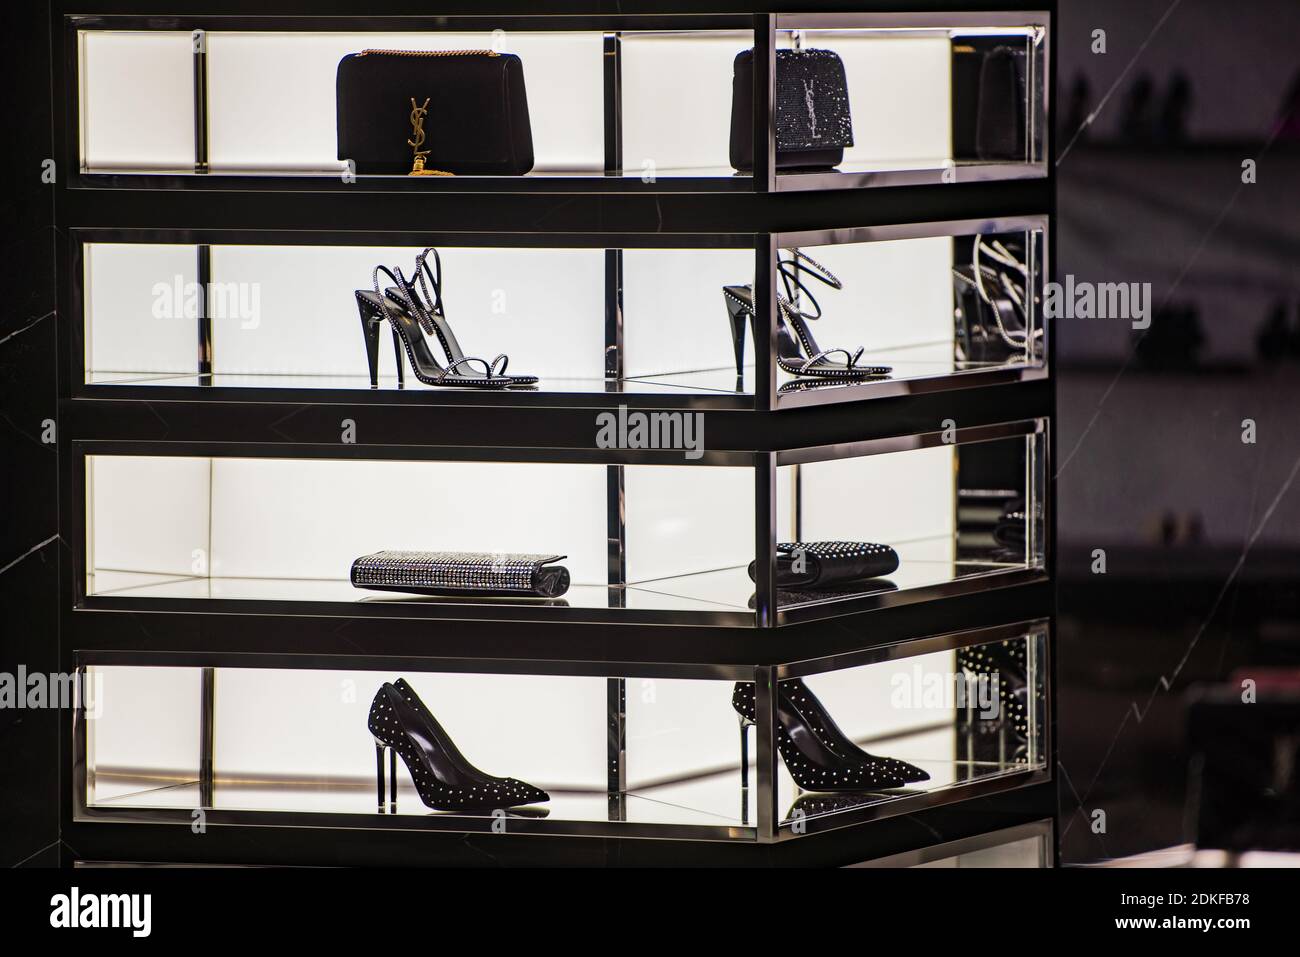 What it's like to shop the YSL outlet #ysl #luxurydeals